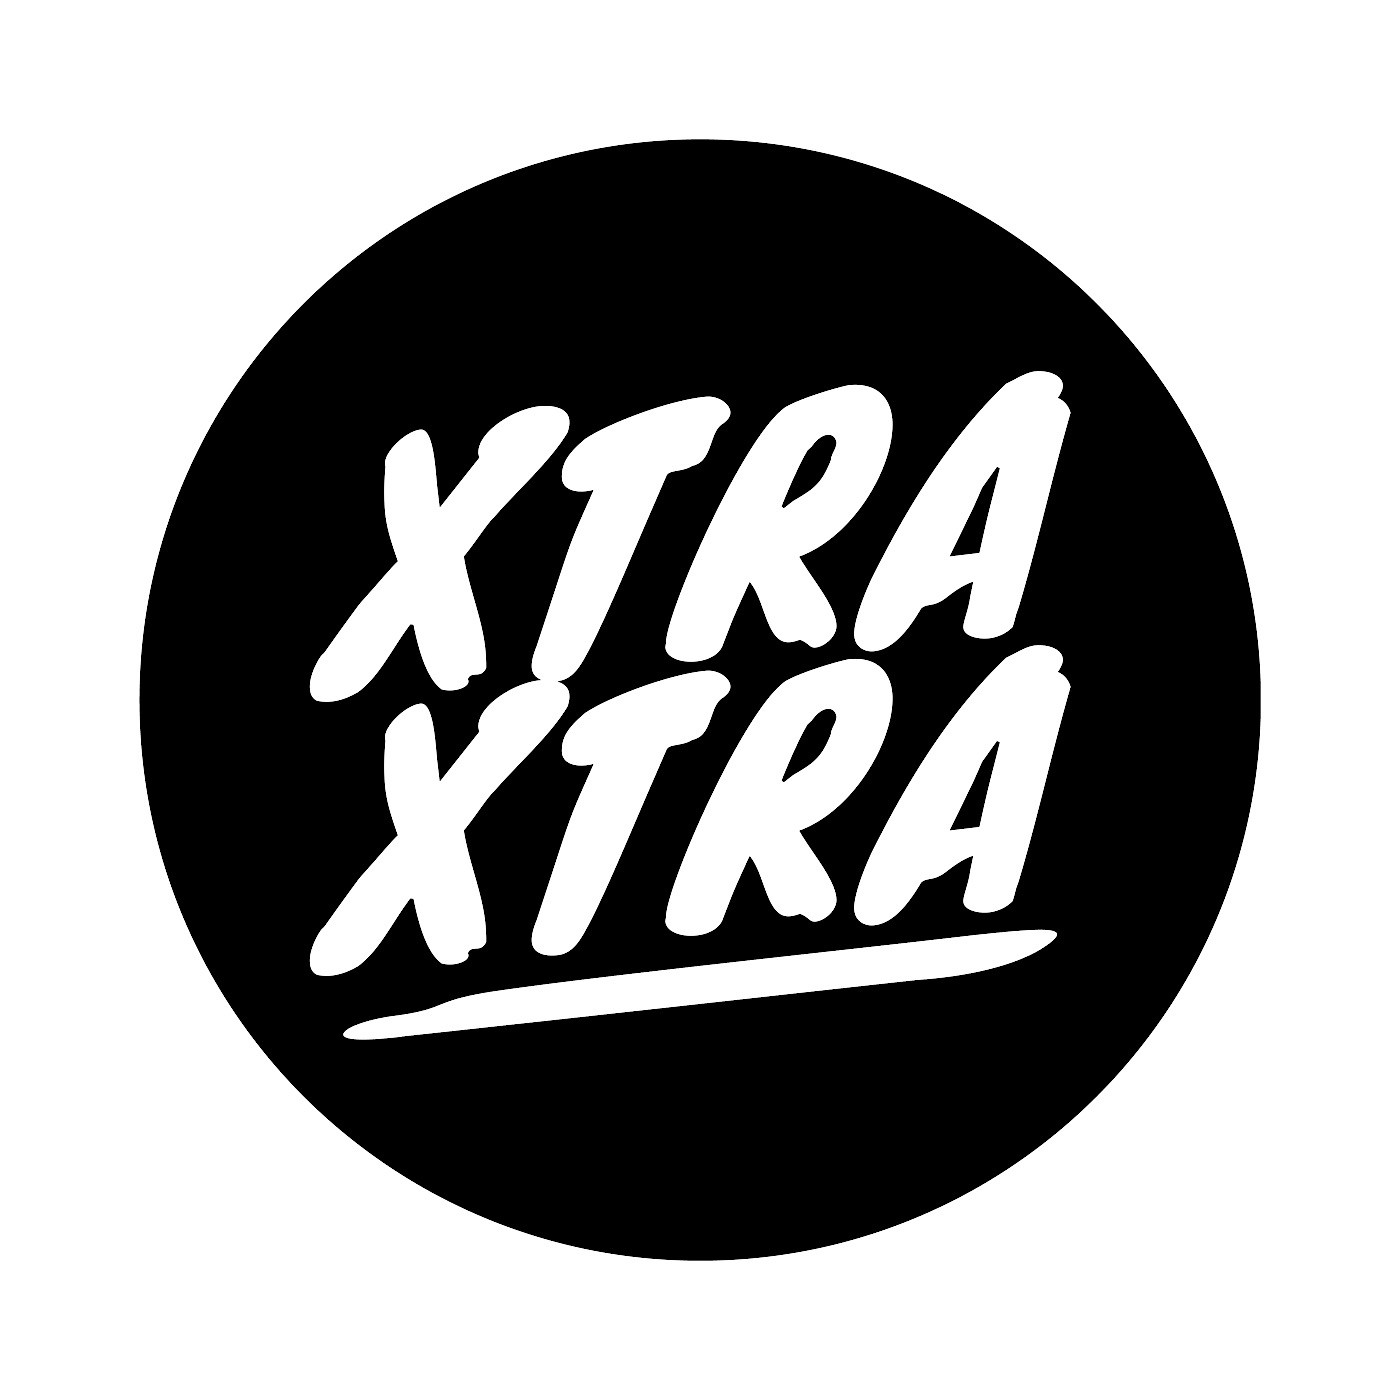 Xtra Xtra Presented By VDG Sports